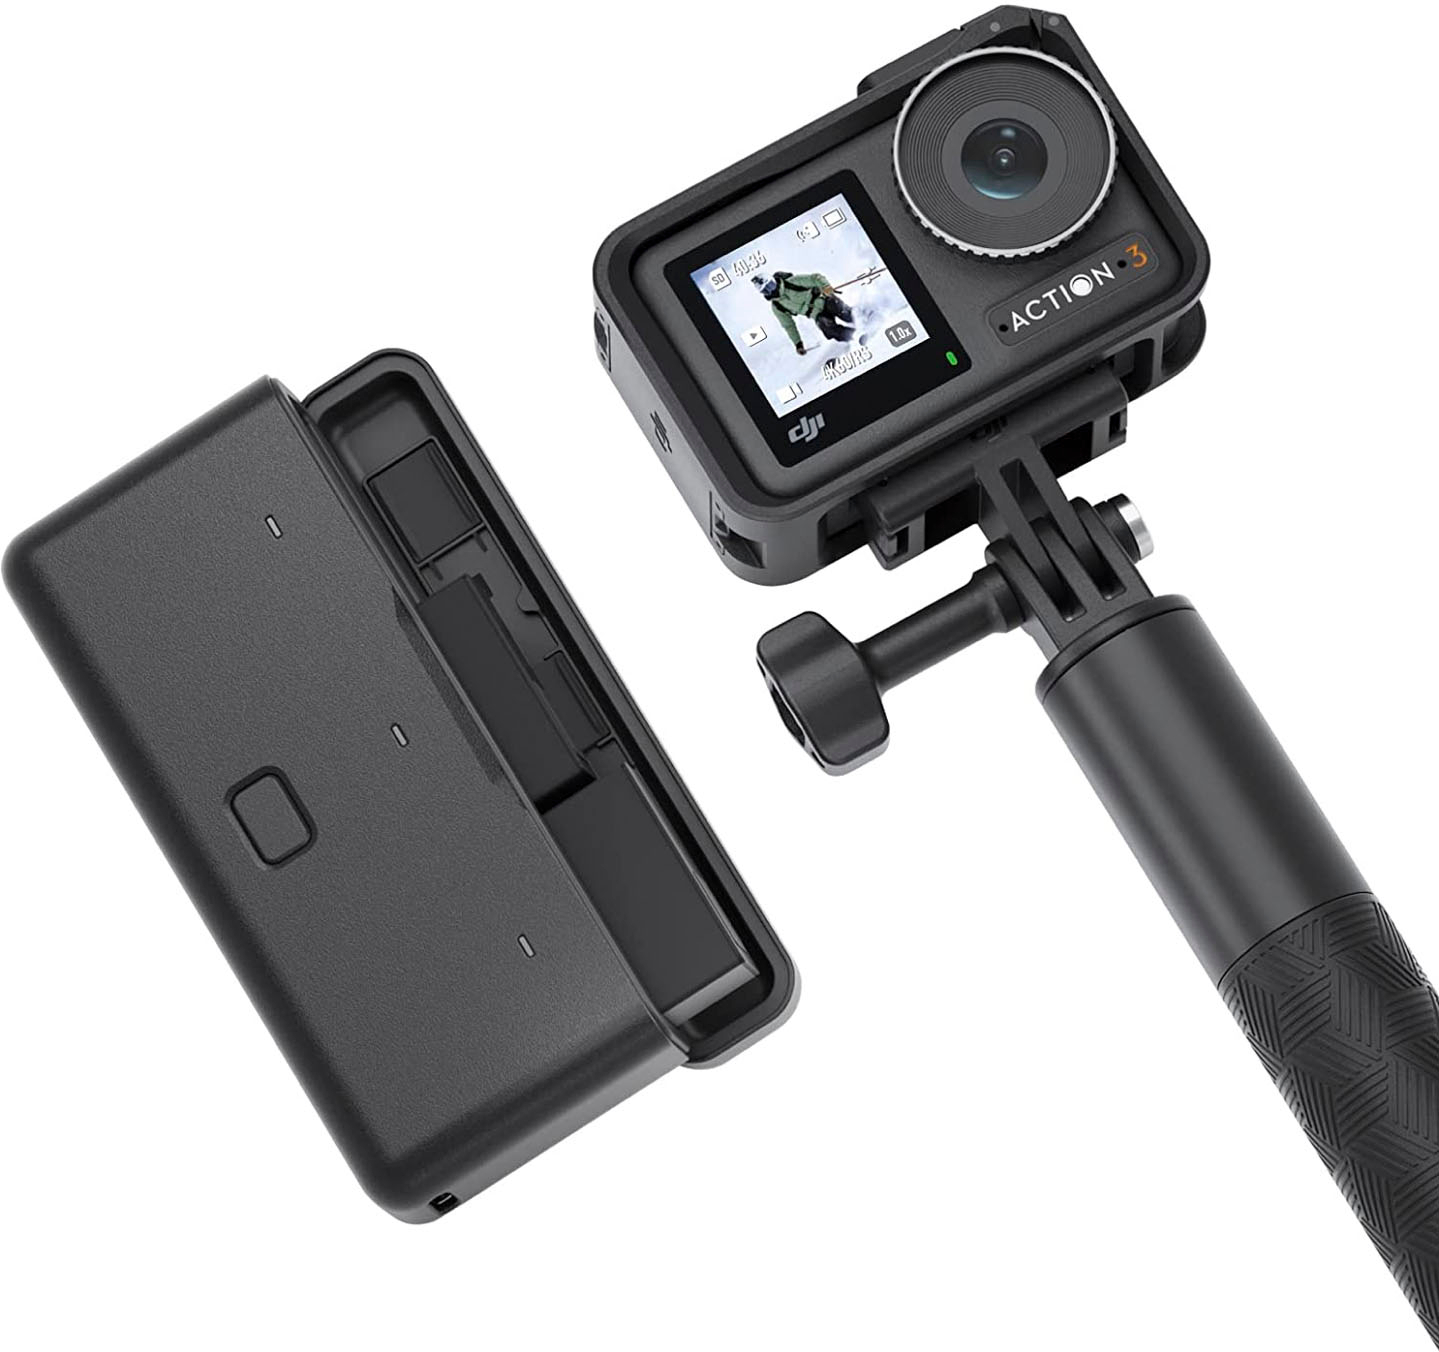 DJI releases new firmware update for Osmo Action 4 camera